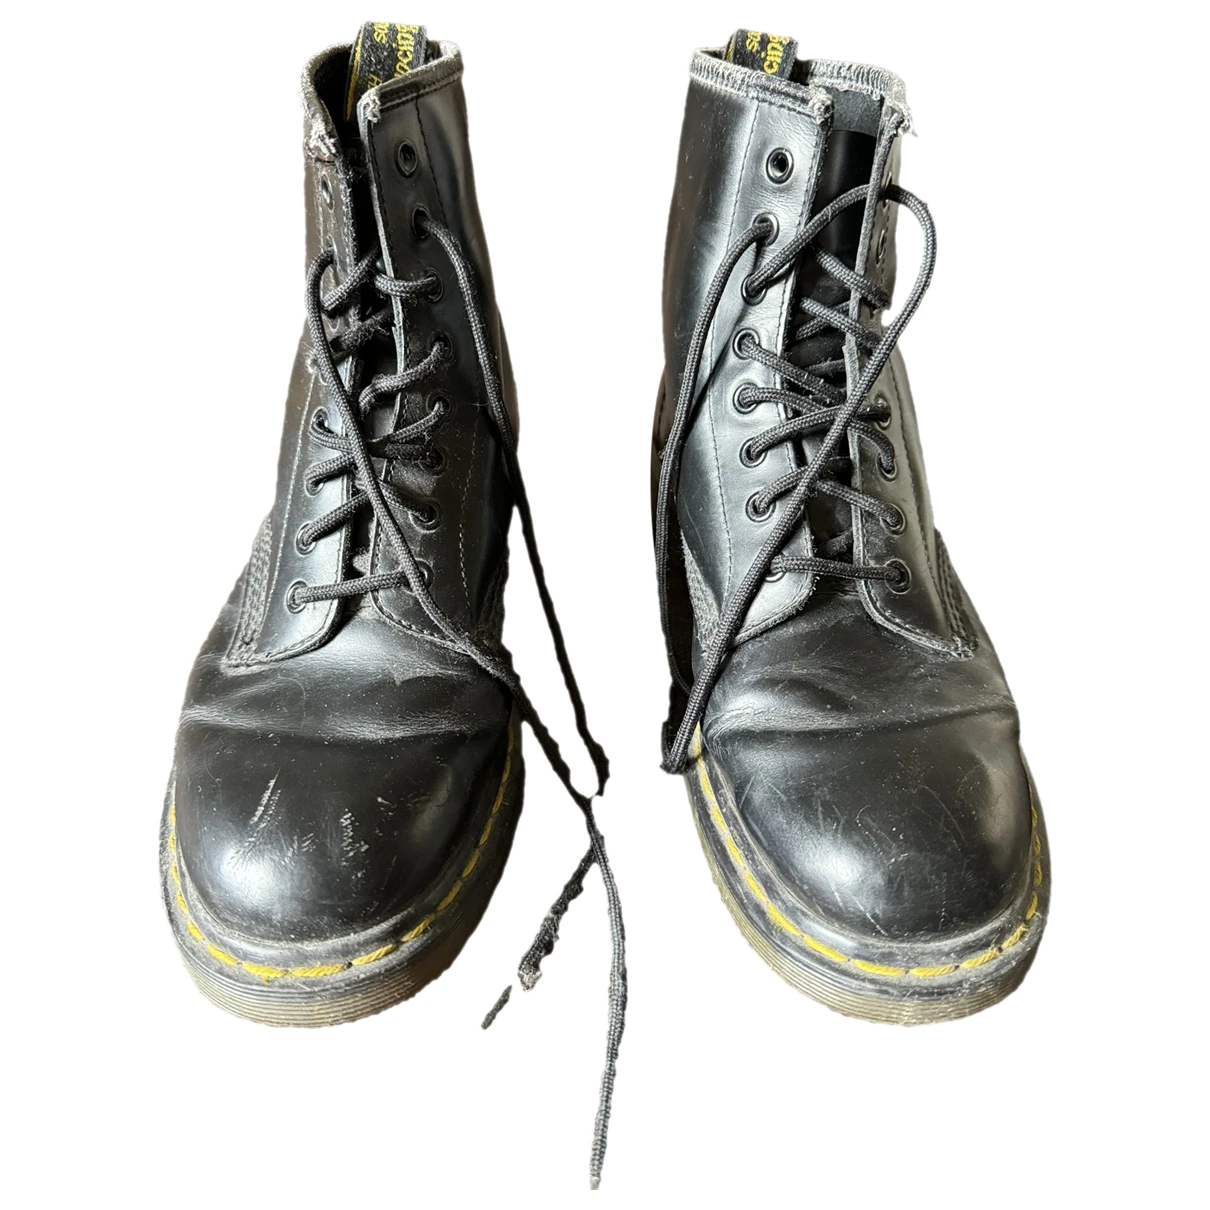 Pre-owned Dr. Martens' 1460 Pascal (8 Eye) Leather Boots In Black